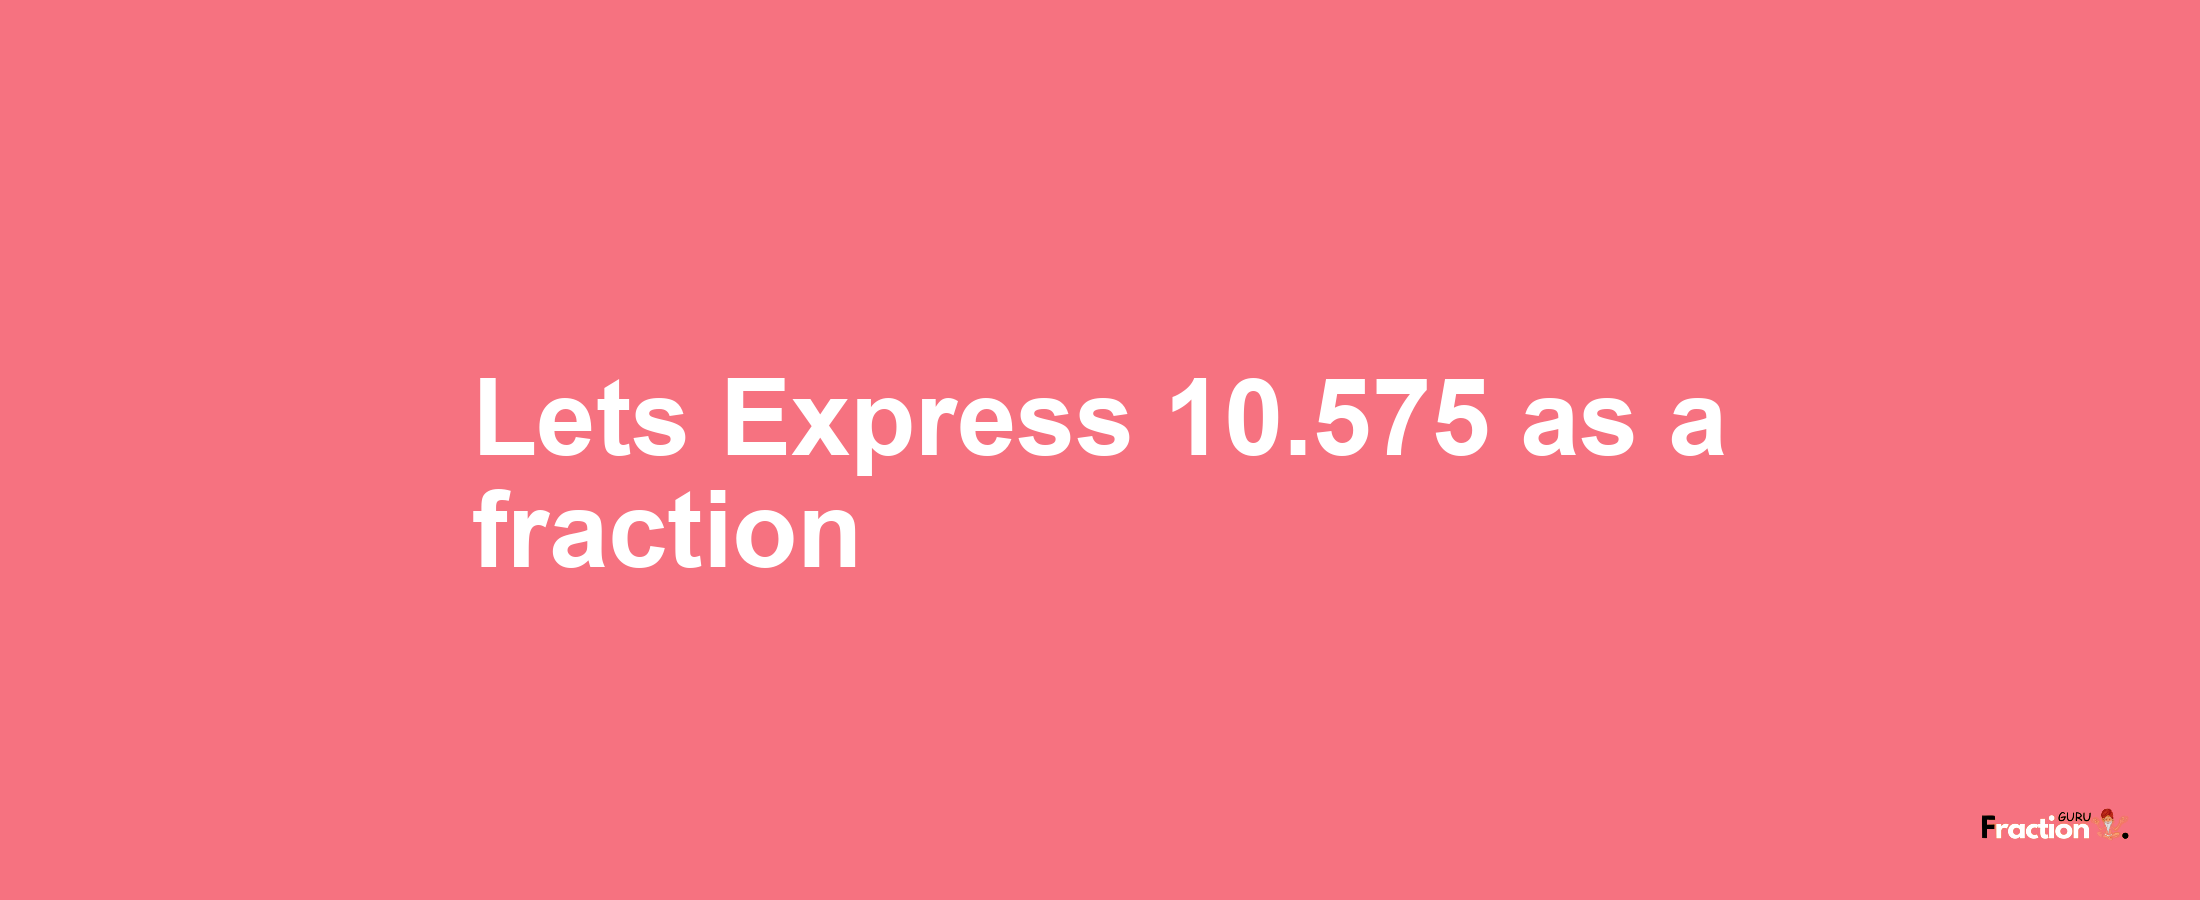 Lets Express 10.575 as afraction